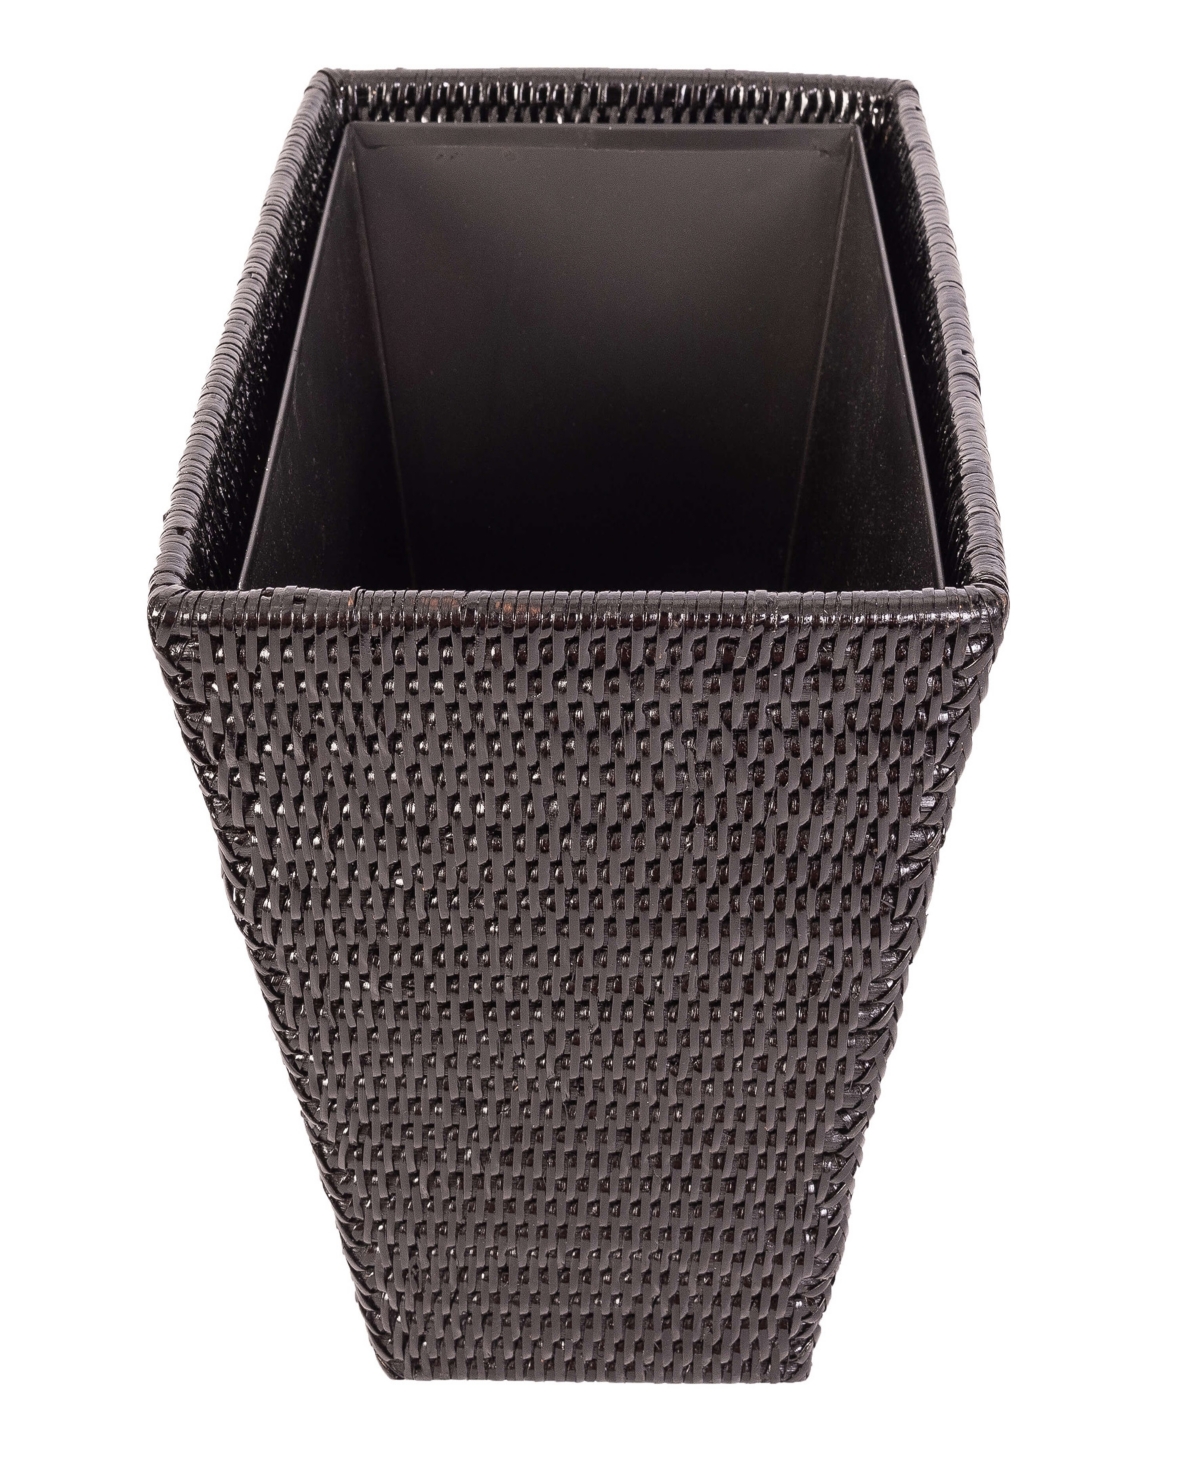 Shop Artifacts Trading Company Rattan Rectangular Tapered Waste Basket With Metal Liner In Tudor Black